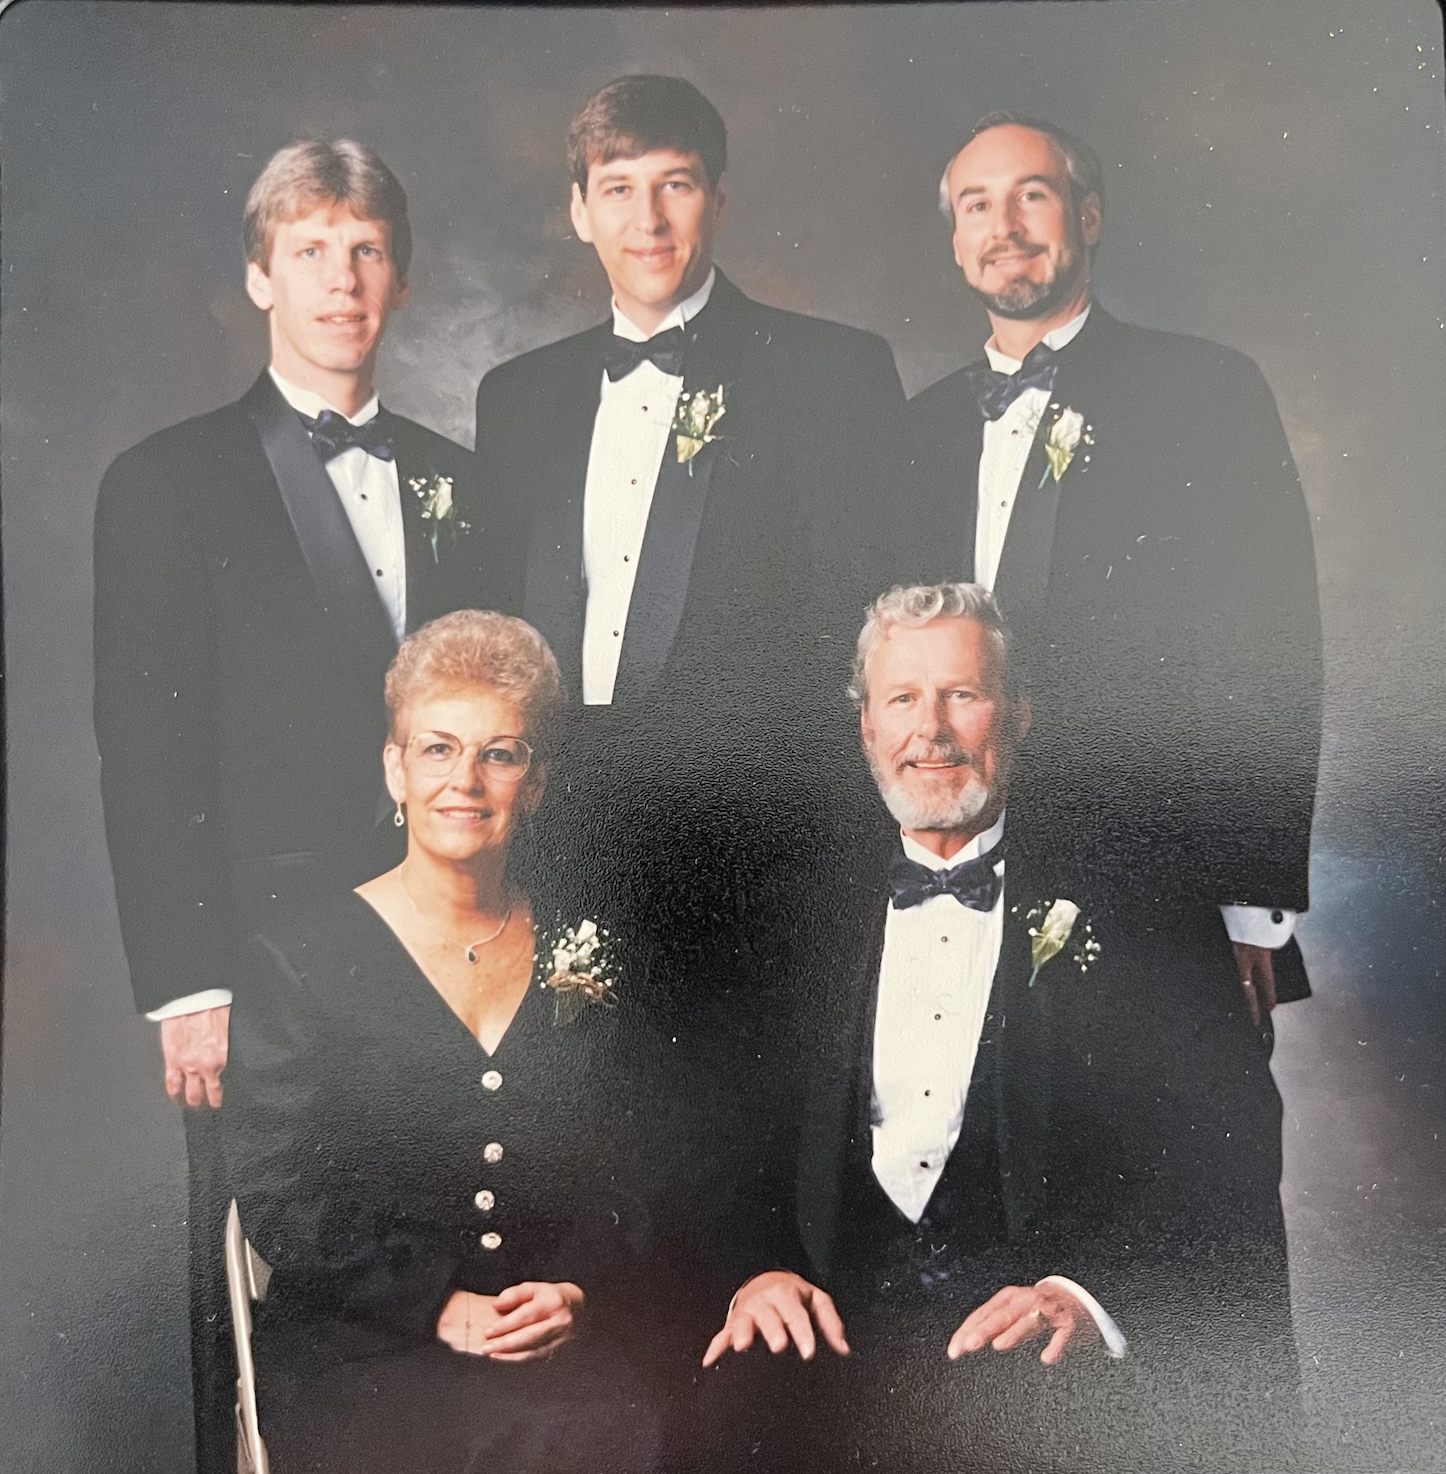 Jerry, Pat, Tom, Gary and Jim 1993.<br />
Such a fabulous photo of you all at Jim's Wedding